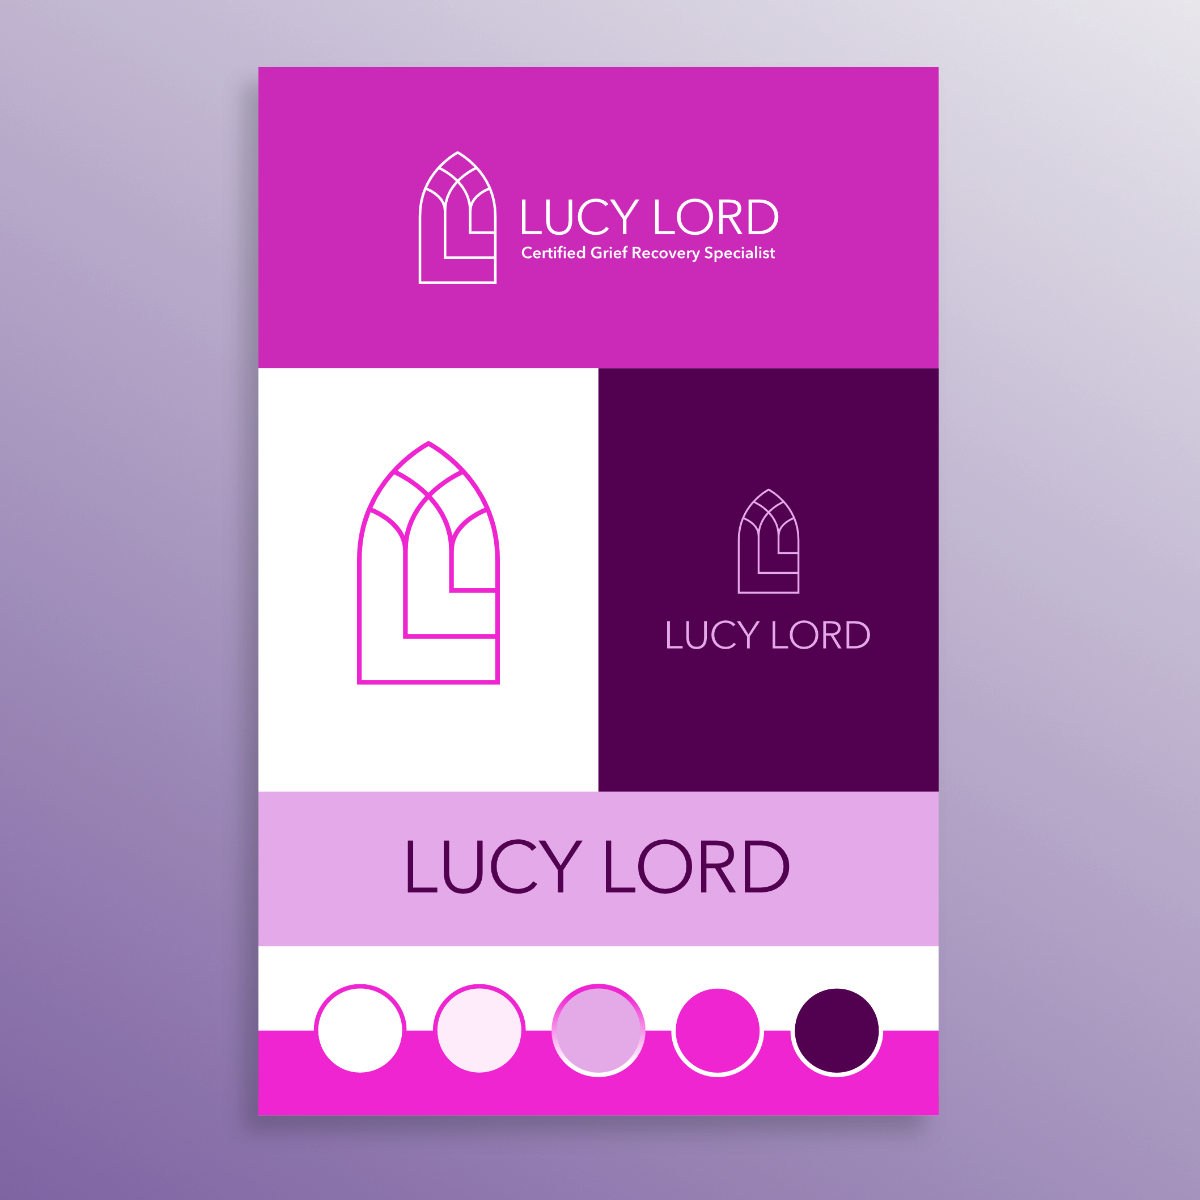 Lucy Lord Certified Grief Recovery Specialist Branding